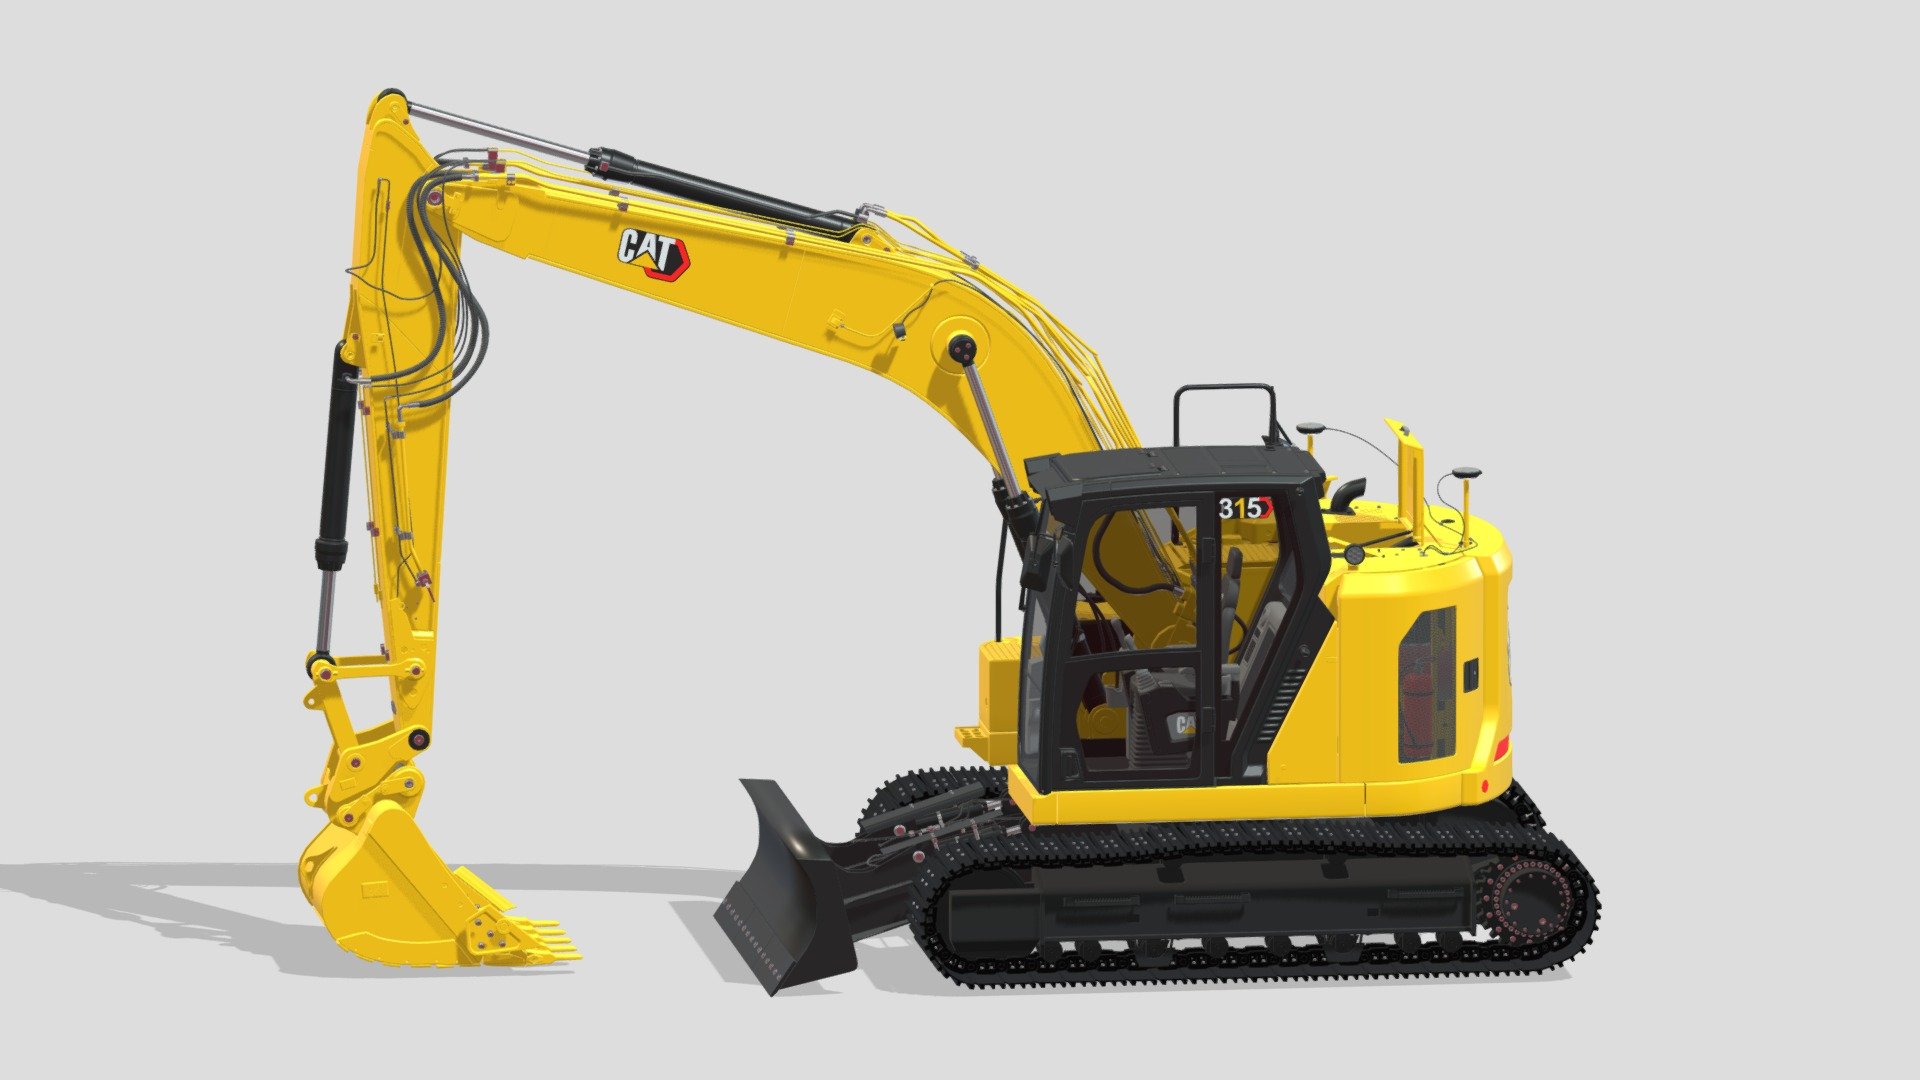 Hi, I'm Frezzy. I am leader of Cgivn studio. We are a team of talented artists working together since 2013.
If you want hire me to do 3d model please touch me at:cgivn.studio Thank you! - Cat 315 Excavator - Buy Royalty Free 3D model by Frezzy3D 3d model